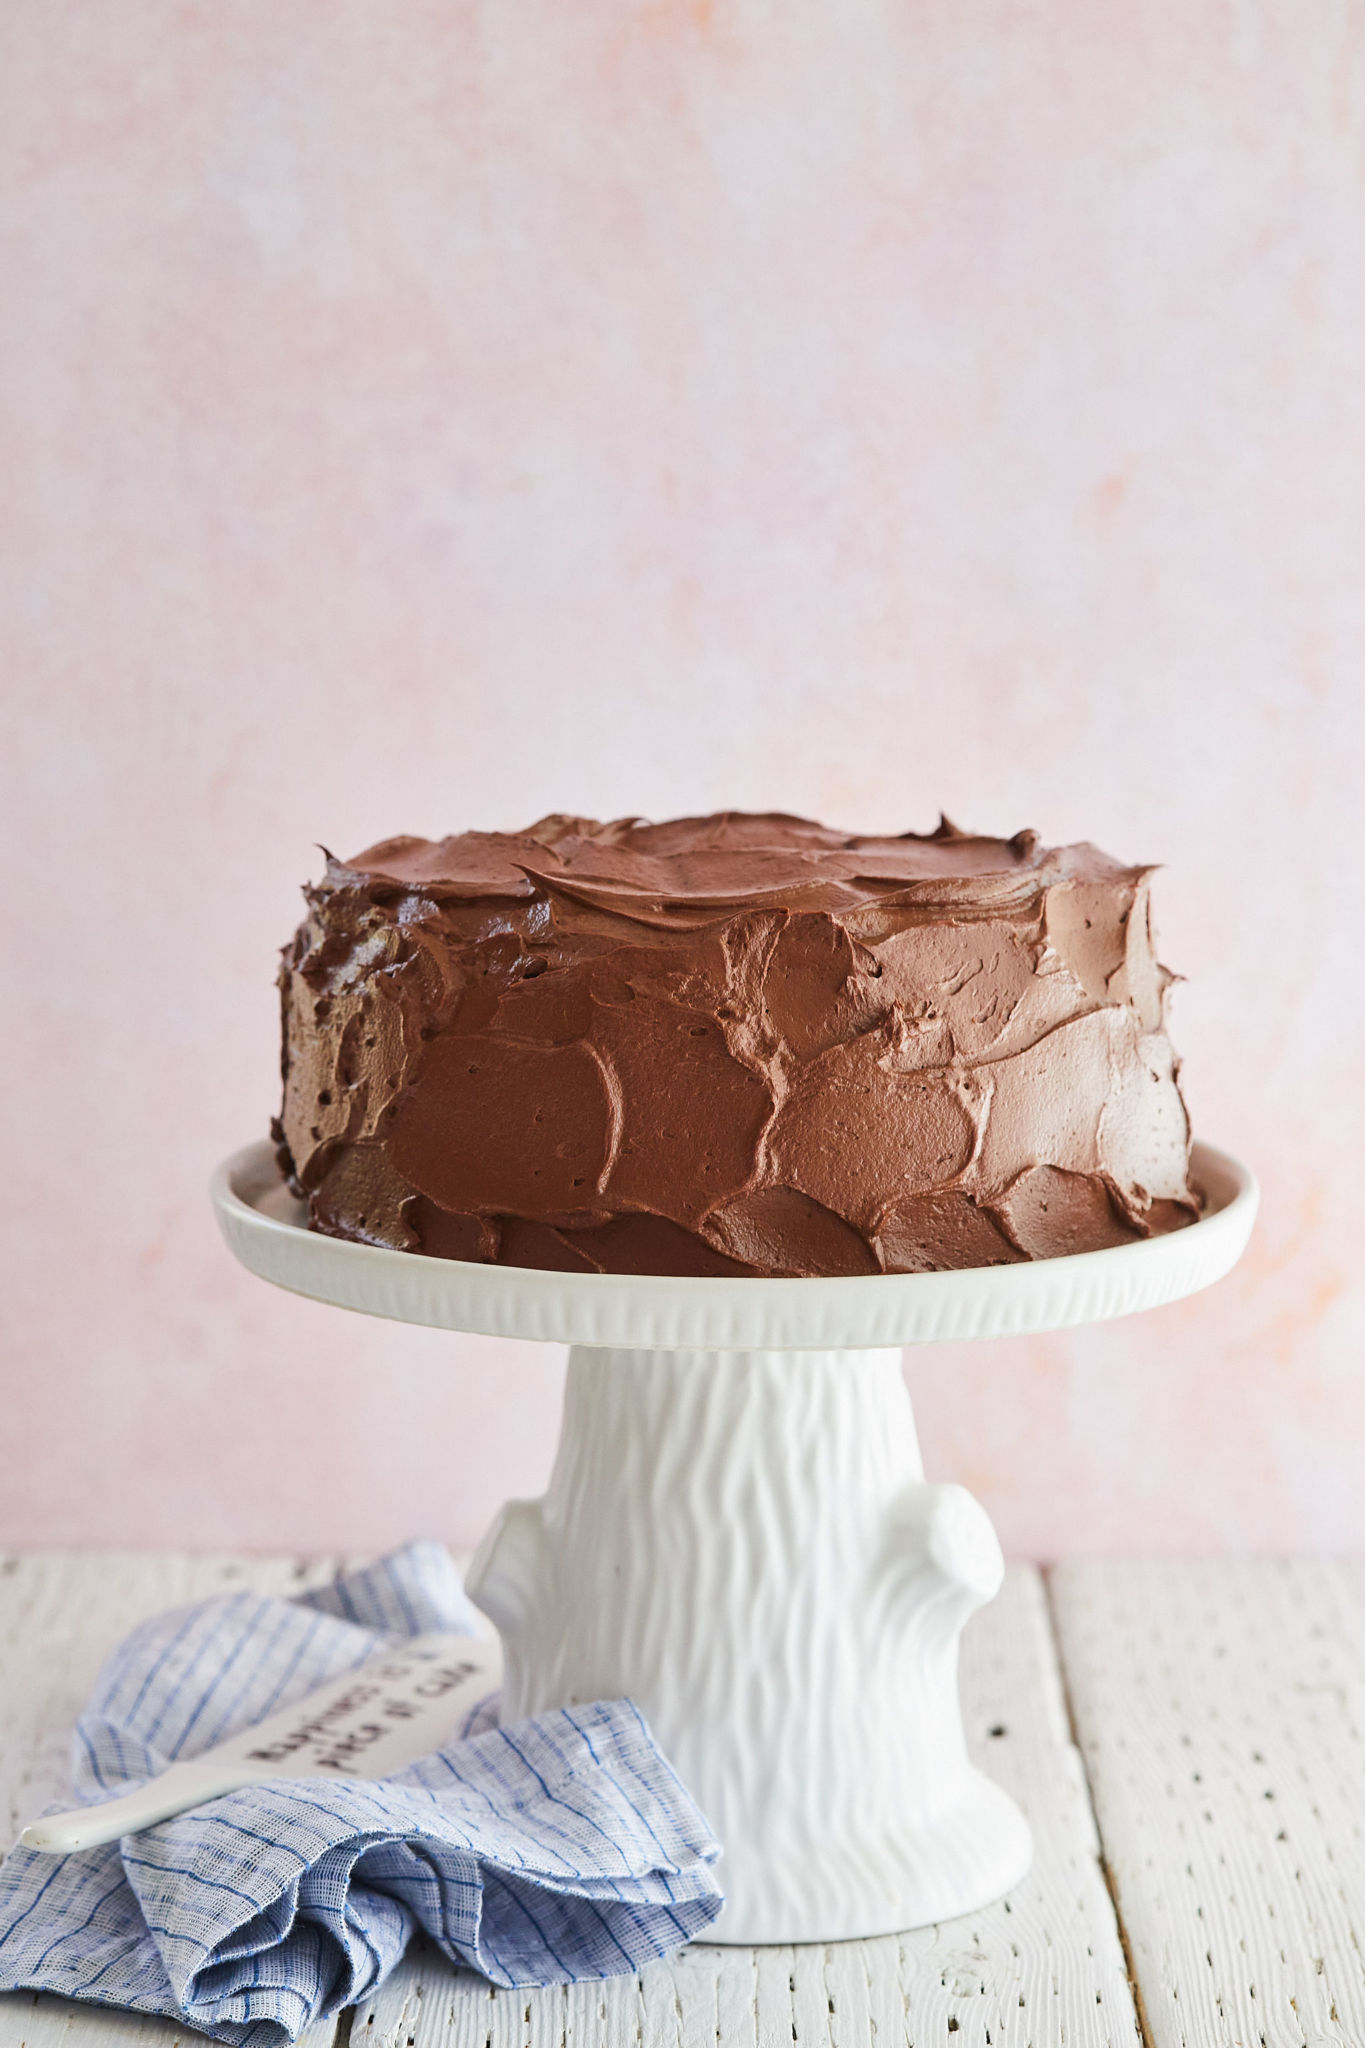 A finished Best-Ever Chocolate Cake on a cake stand with whipped ganache.